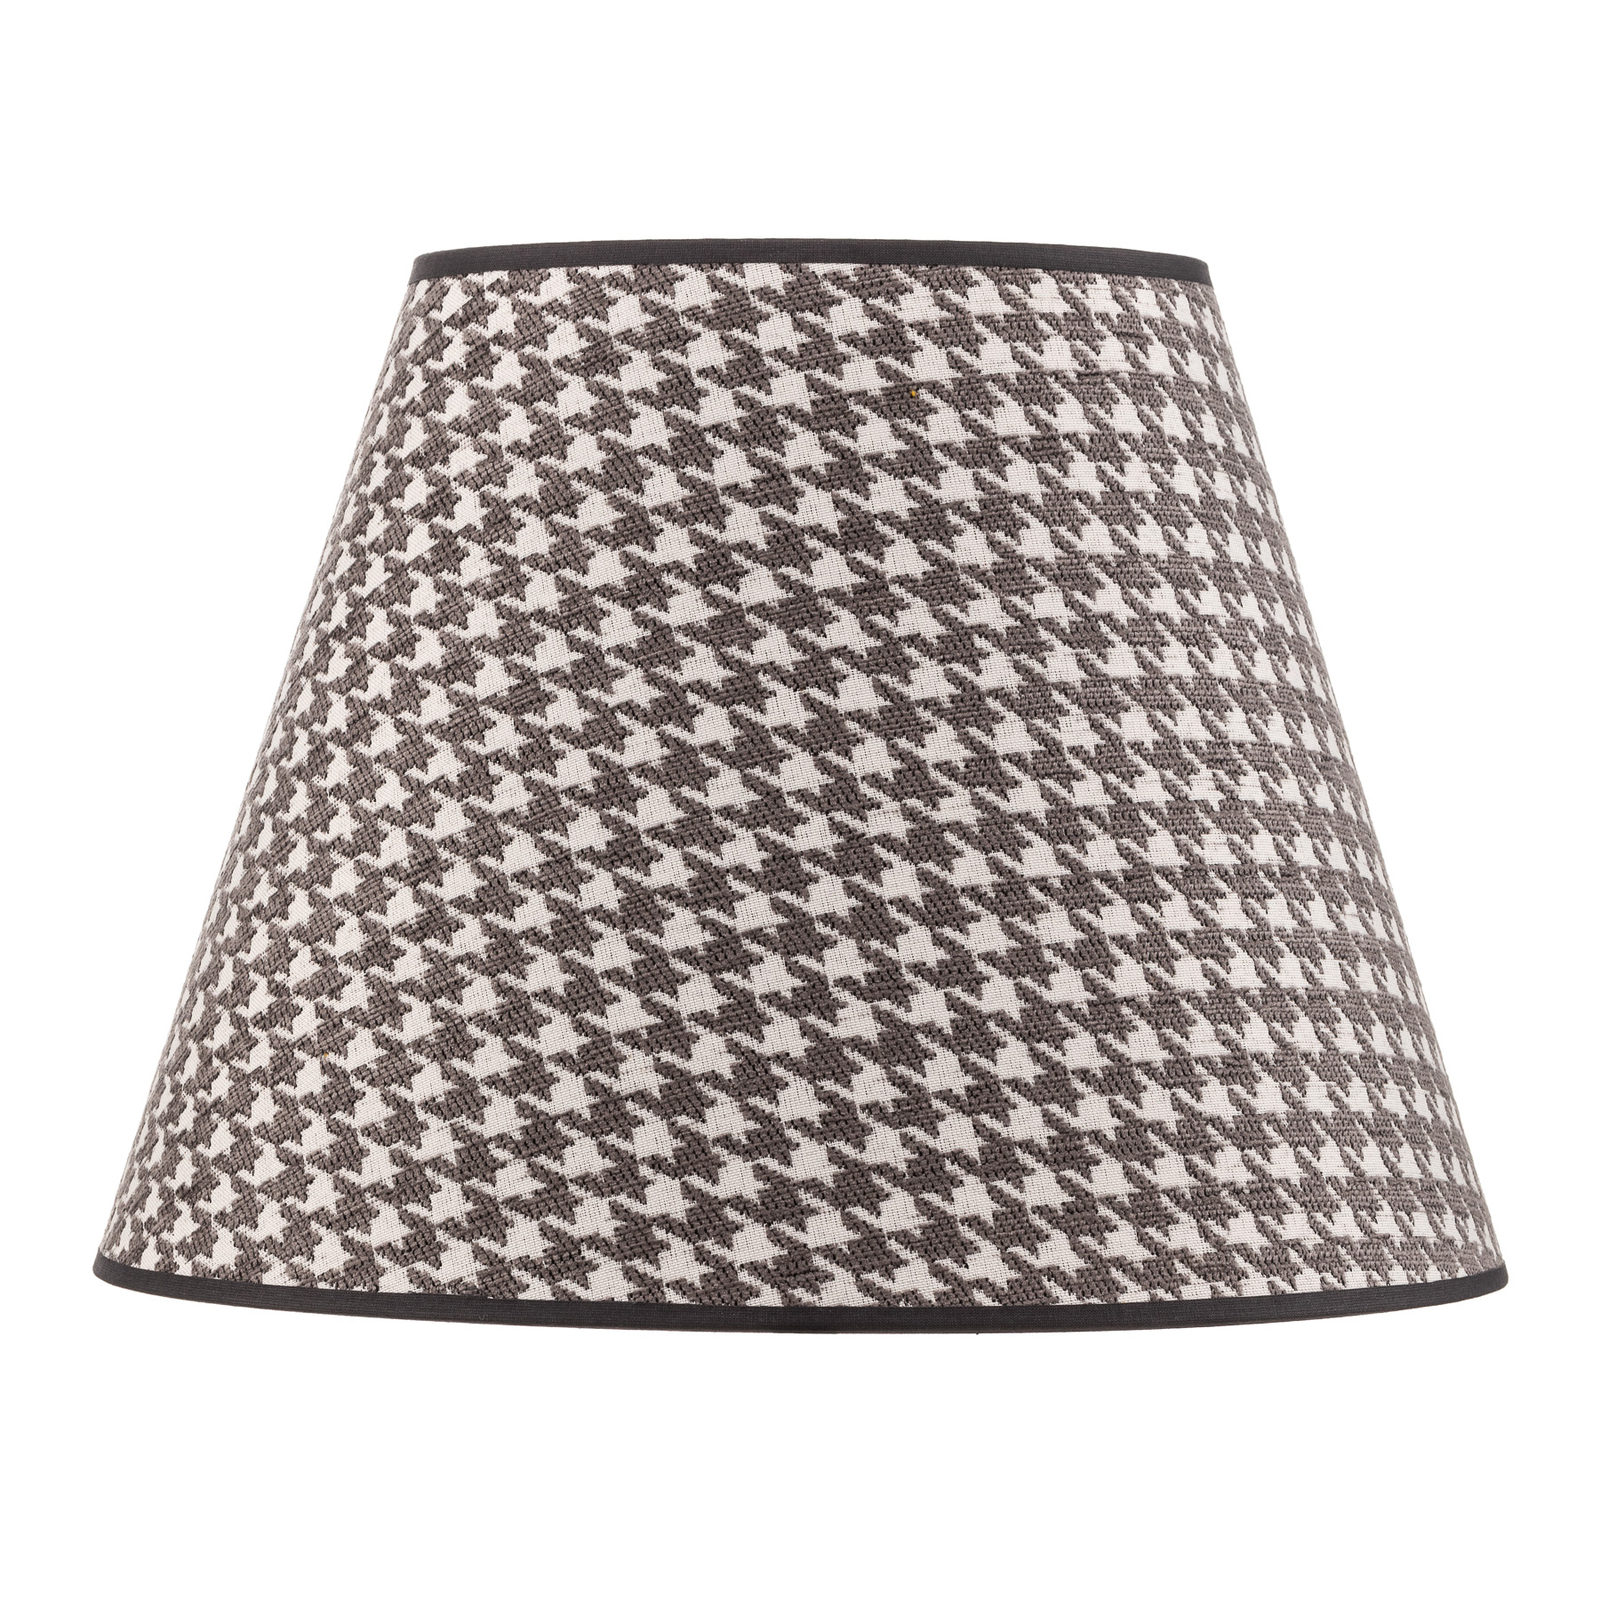 Sofia lampshade 26 cm, houndstooth pattern grey